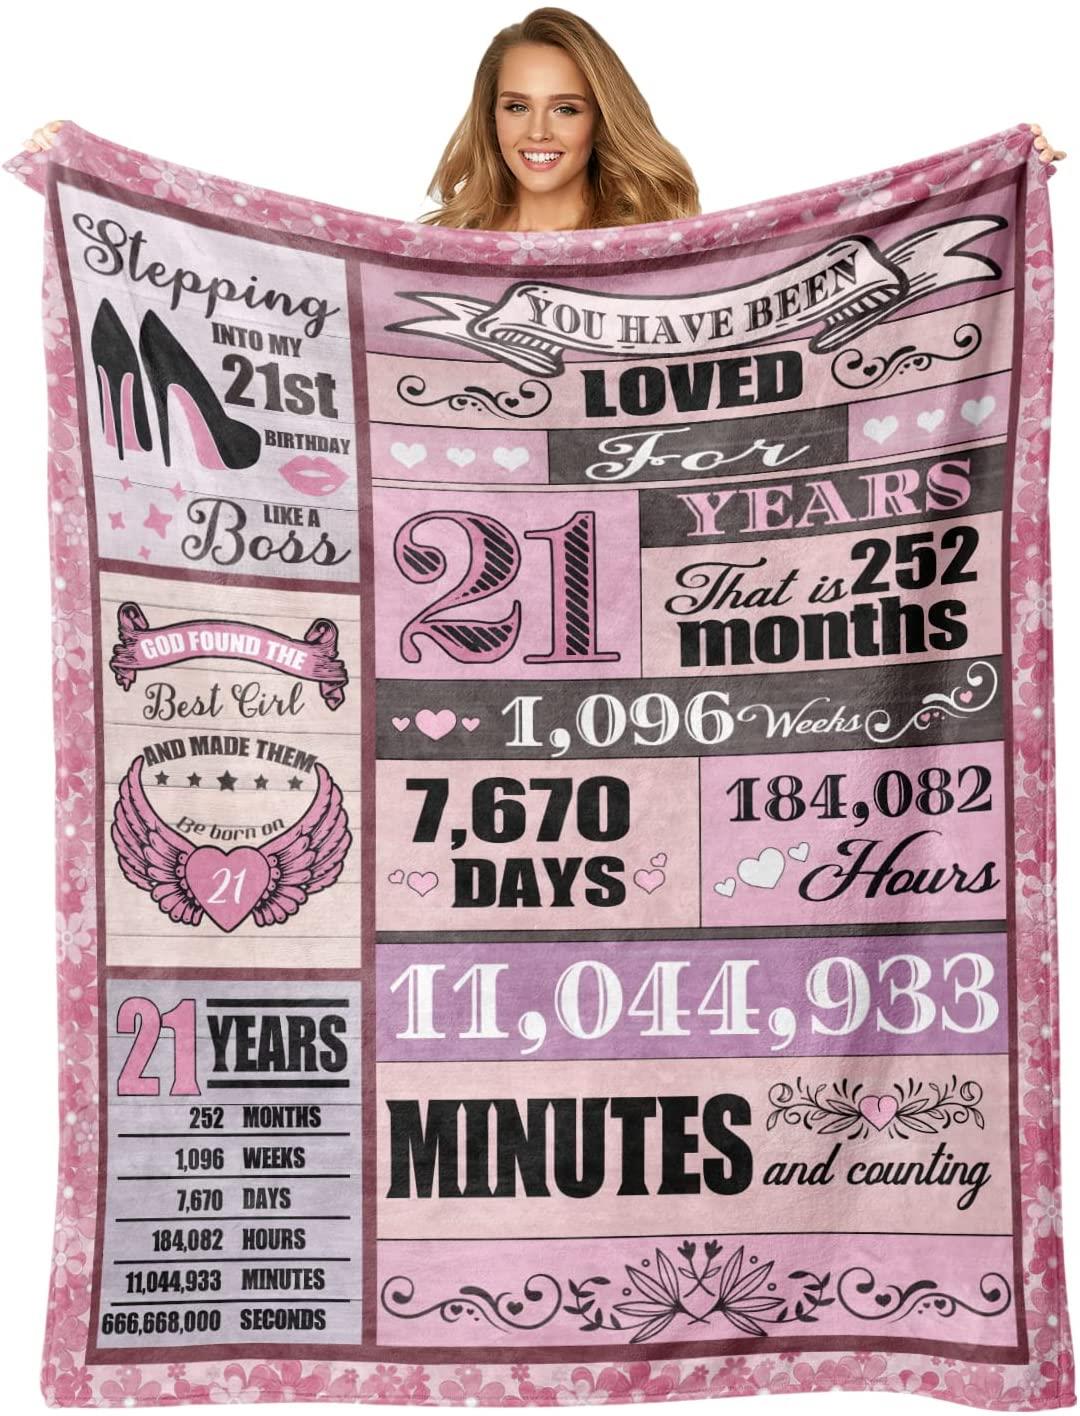 21St Birthday Blanket, Birthday Decorations For Her,21St Birthday Gifts For Girls,21St Birthday Gifts For Her, To My Daughter Blankets From Mom, Sisters Gifts From Sister